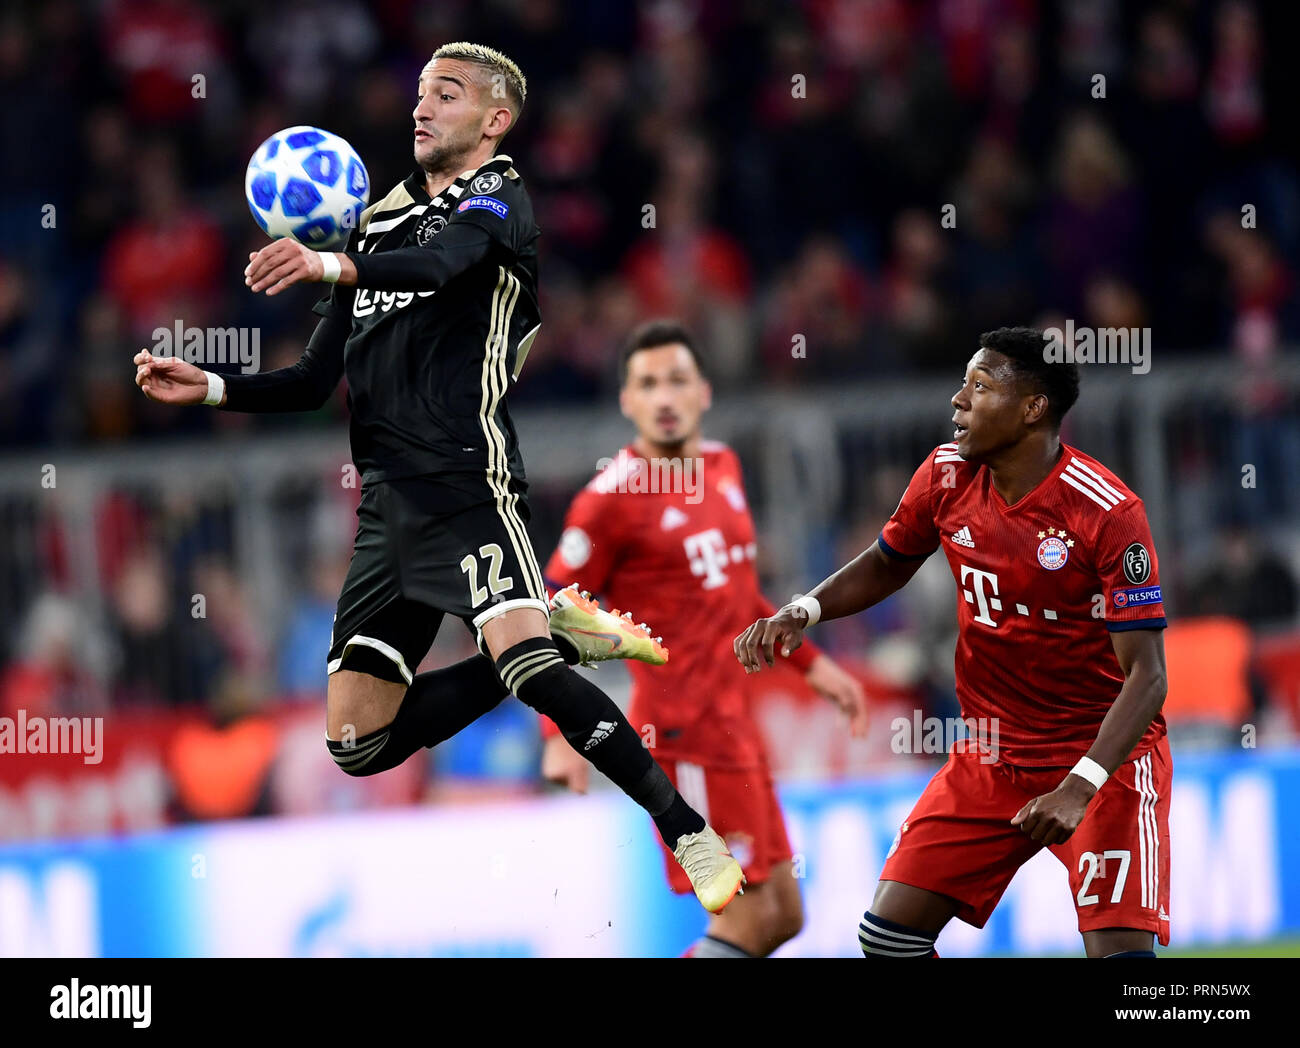 Munich, Bavaria. 01st Oct, 2018. Soccer: Champions League, Bayern Munich -  Ajax Amsterdam, Group stage, Group E, 2nd matchday in the Allianz Arena.  David Alaba (r) from Munich and Hakim Ziyech from